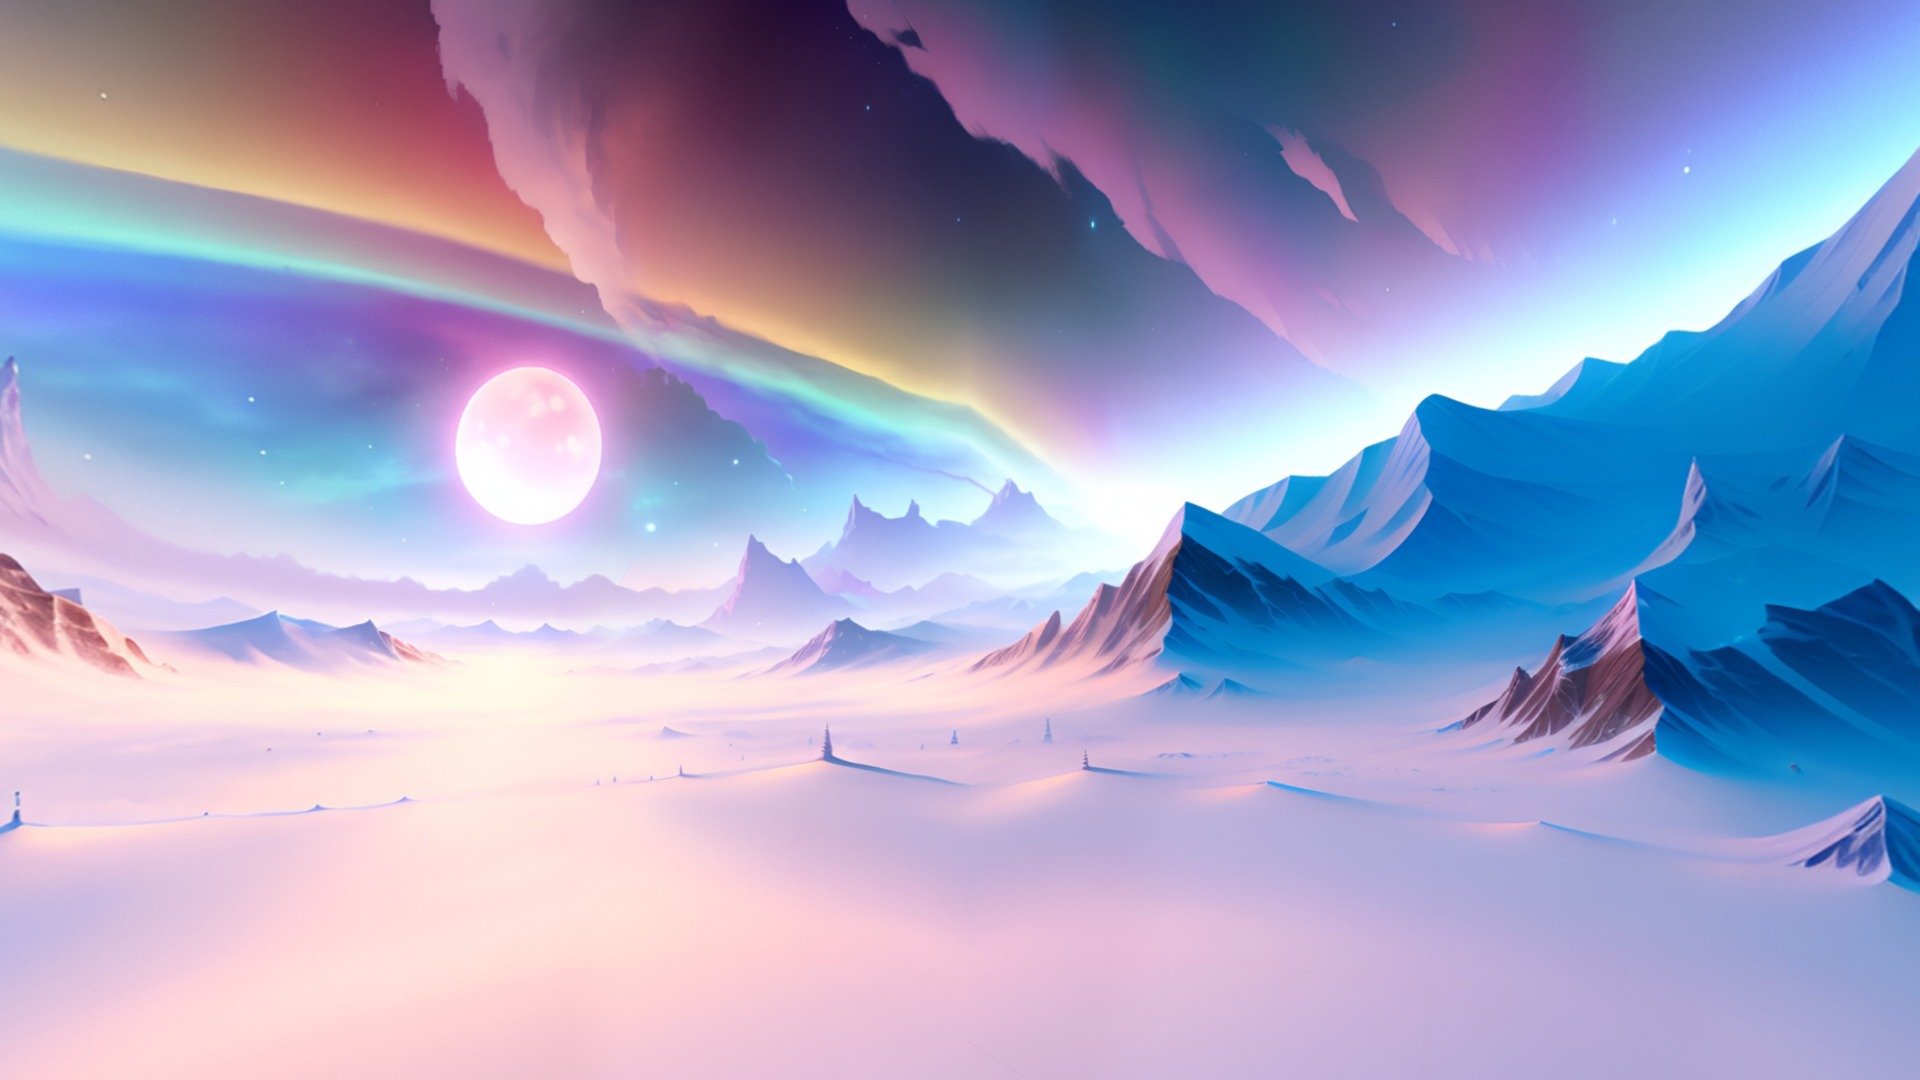 Beautiful stylized dreamy skybox. Perfect for beautiful, stylized environments and your rendering scene.

The package contains one panorama texture and one cubemap texture (png)

panorama texture: 6144 x 3072

cubemap texture: 6144 x 4608

The sizes can be changed in your graphics program as desired

( textures are under Other available downloads)

used: AI, Photoshop

*-------------Terms of Use--------------

Commercial use of the assets provided is permitted but cannot be included in an asset pack or sold at any sort of asset/resource marketplace or be shared for free* - SkyBox Snowy Mountain - Buy Royalty Free 3D model by stylized skybox (@skybox_) 3d model